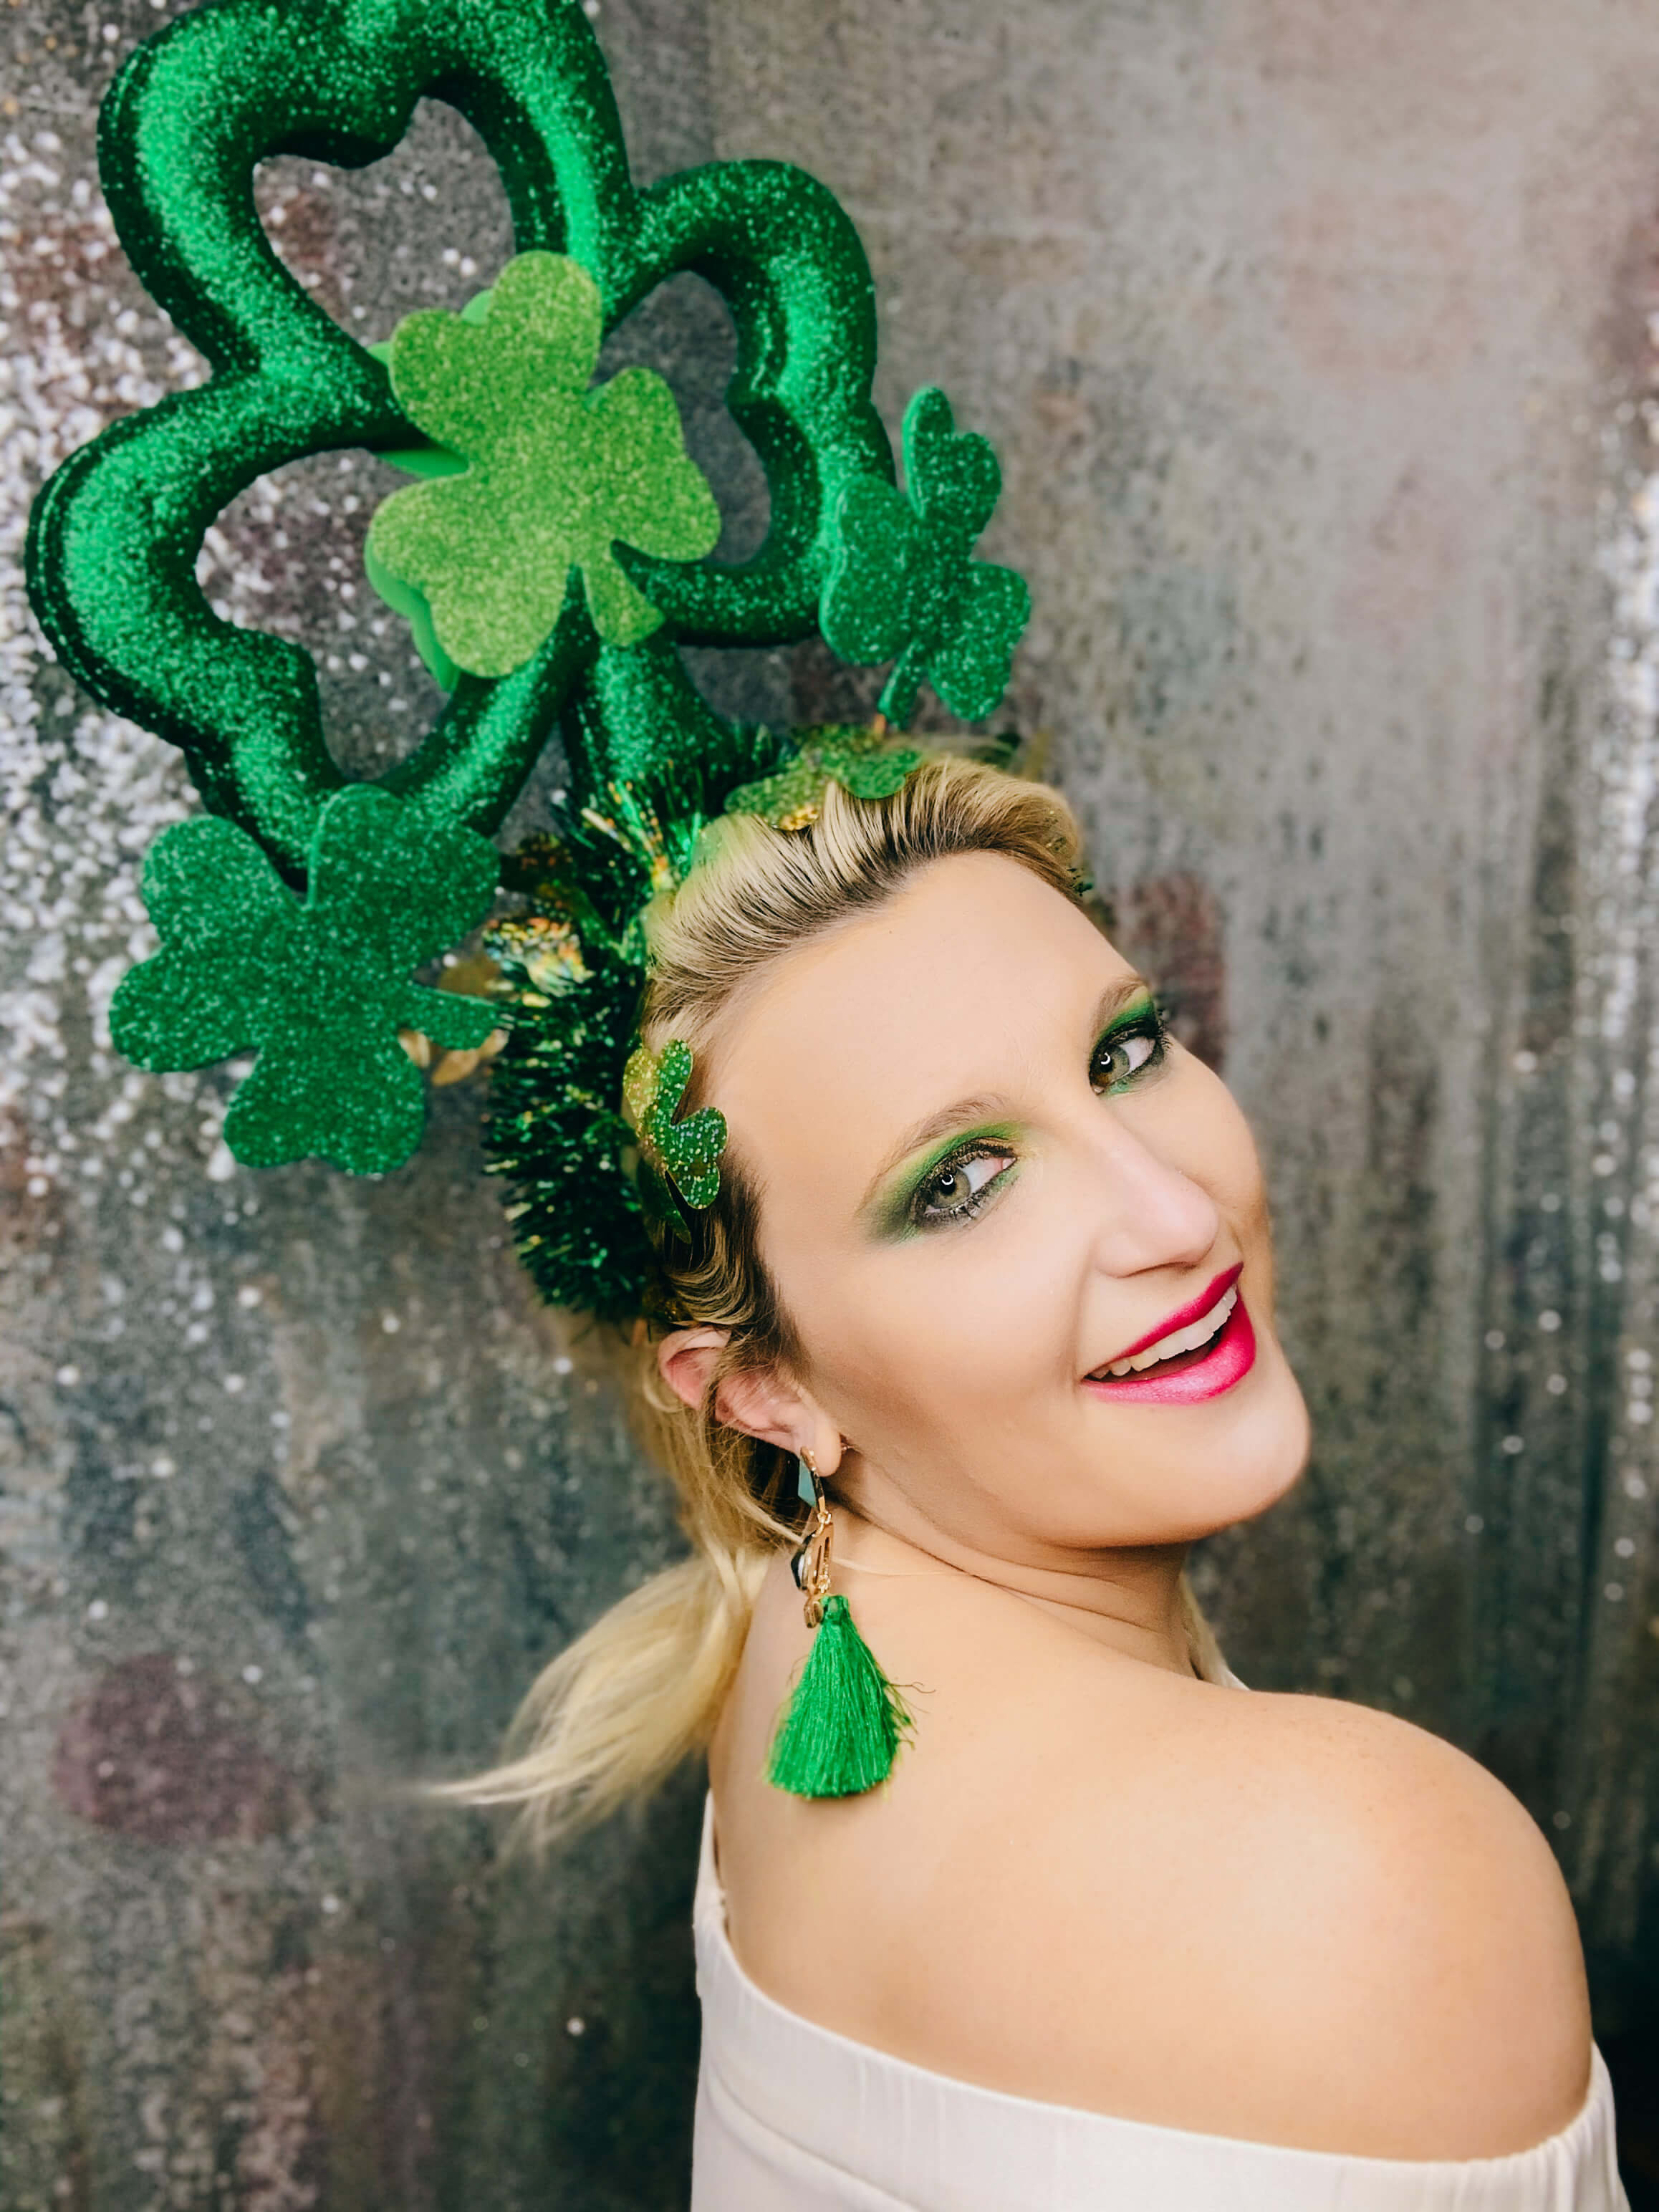 St. Patricks Day Headpiece. St. Patricks Day Accessories. St. Patrick's Day Outfit. Green outfit. Lucky Headband. Clover Headband. St. Patrick's day Headband. Shamrock Headband. Shamrock outfit. Green style. St. Patrick's Day Style.